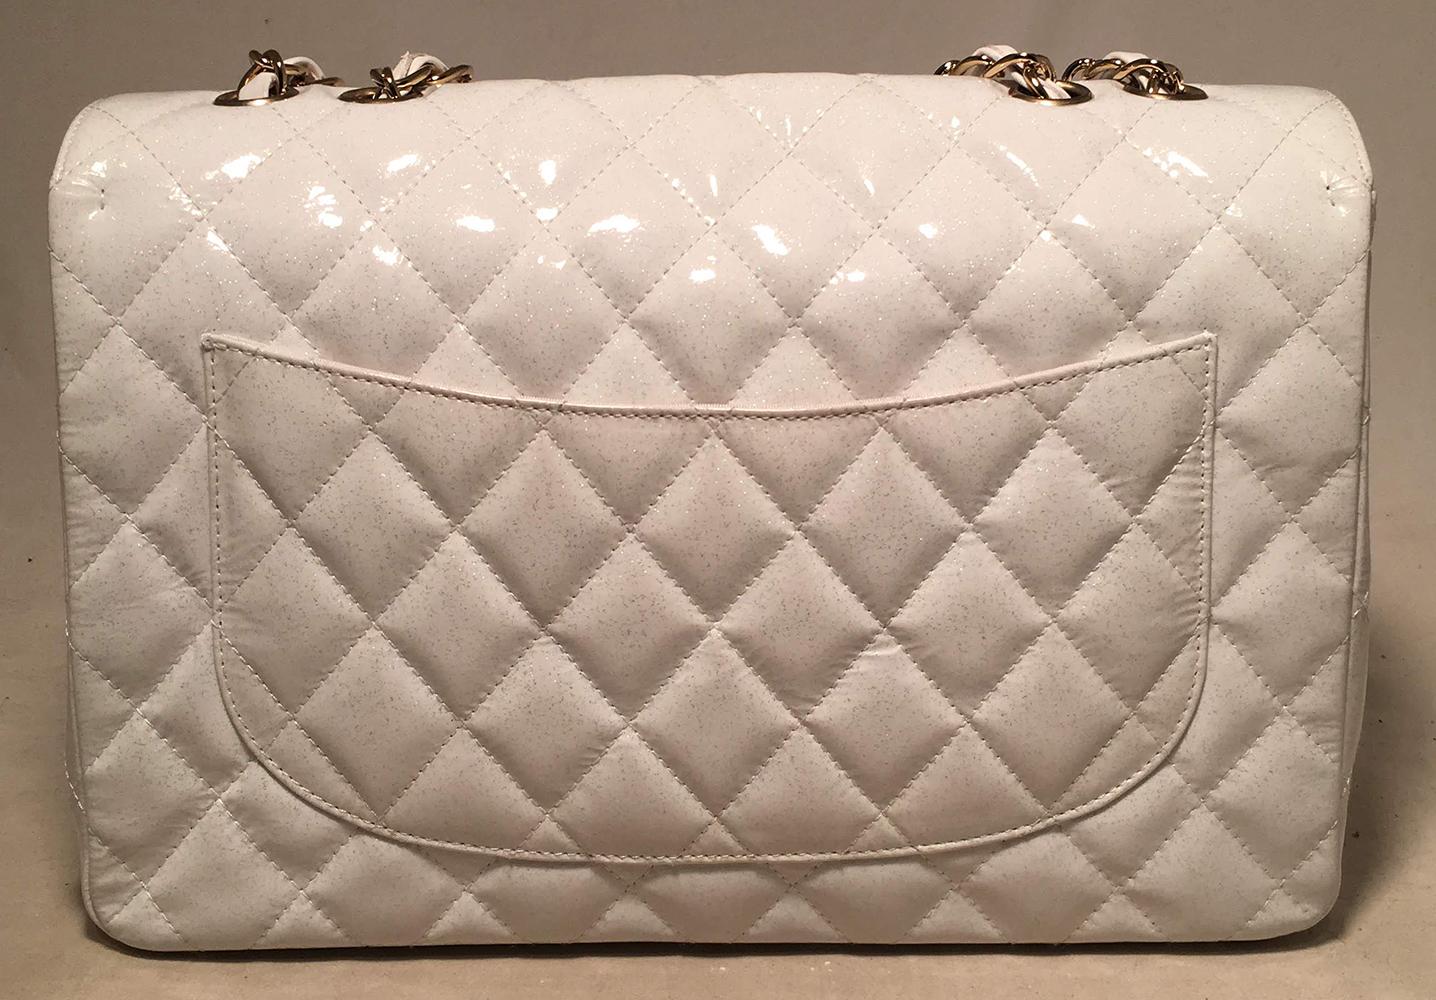 RARE Chanel White Glitter Patent Leather Maxi 2.55 Double flap Classic Shoulder Bag in very good condition. White quilted patent leather exterior with sparkling glitter throughout and gold hardware trim. Front CC twist logo closure opens a white